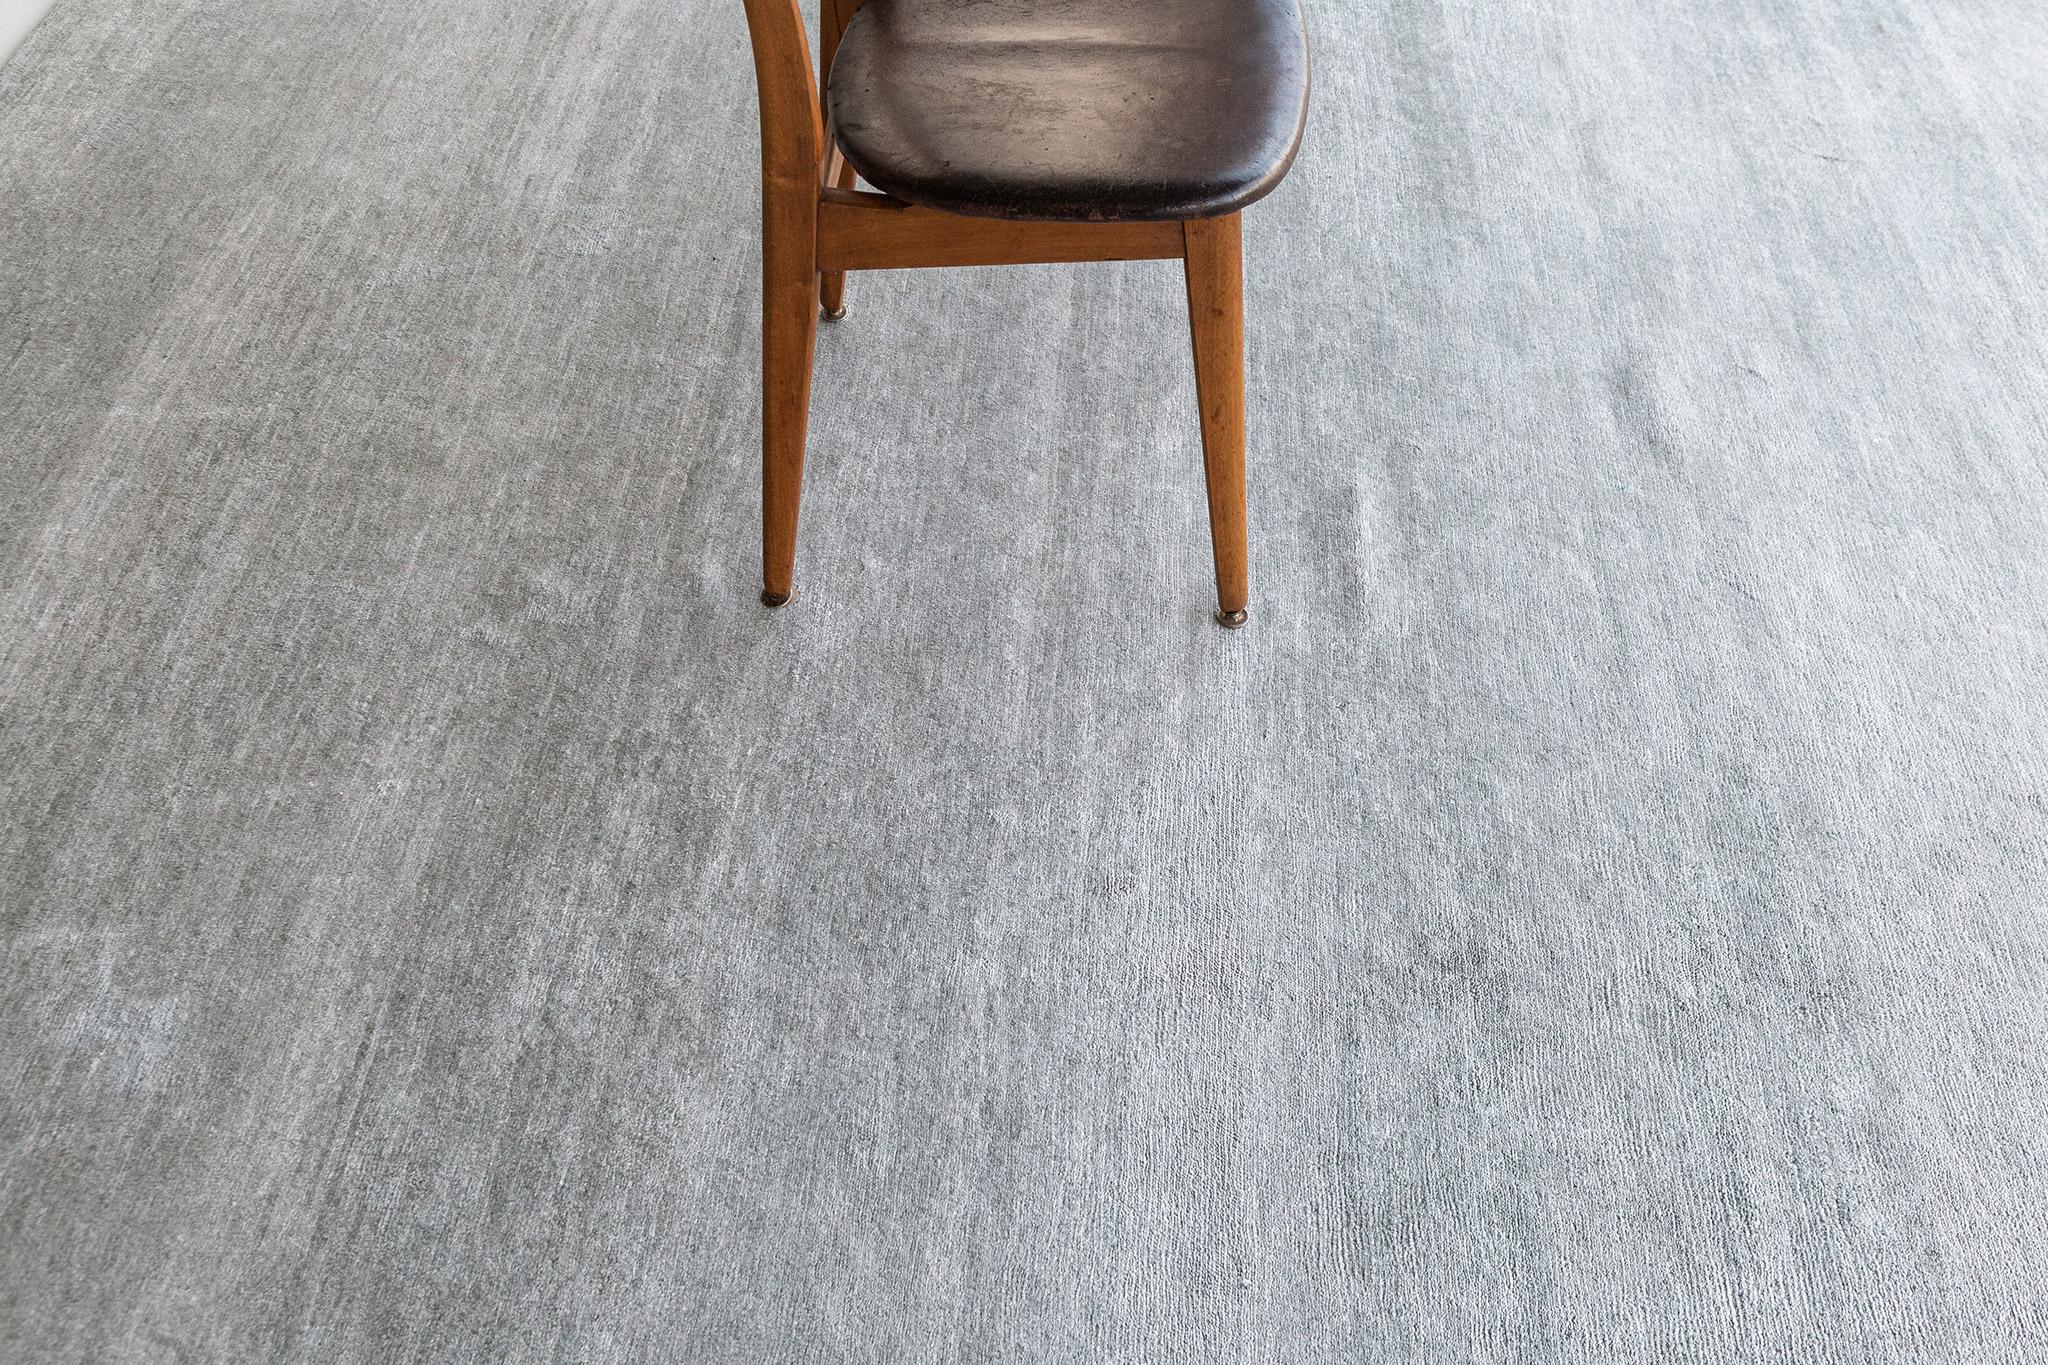 Dara' is a solid bamboo silk rug in the perfect gray tone. Its simplicity does not take away from the rug's luxurious quality and beautiful sheen. Dara is a splendid rug for any design space.

Rug Number
21708
Size
7.11